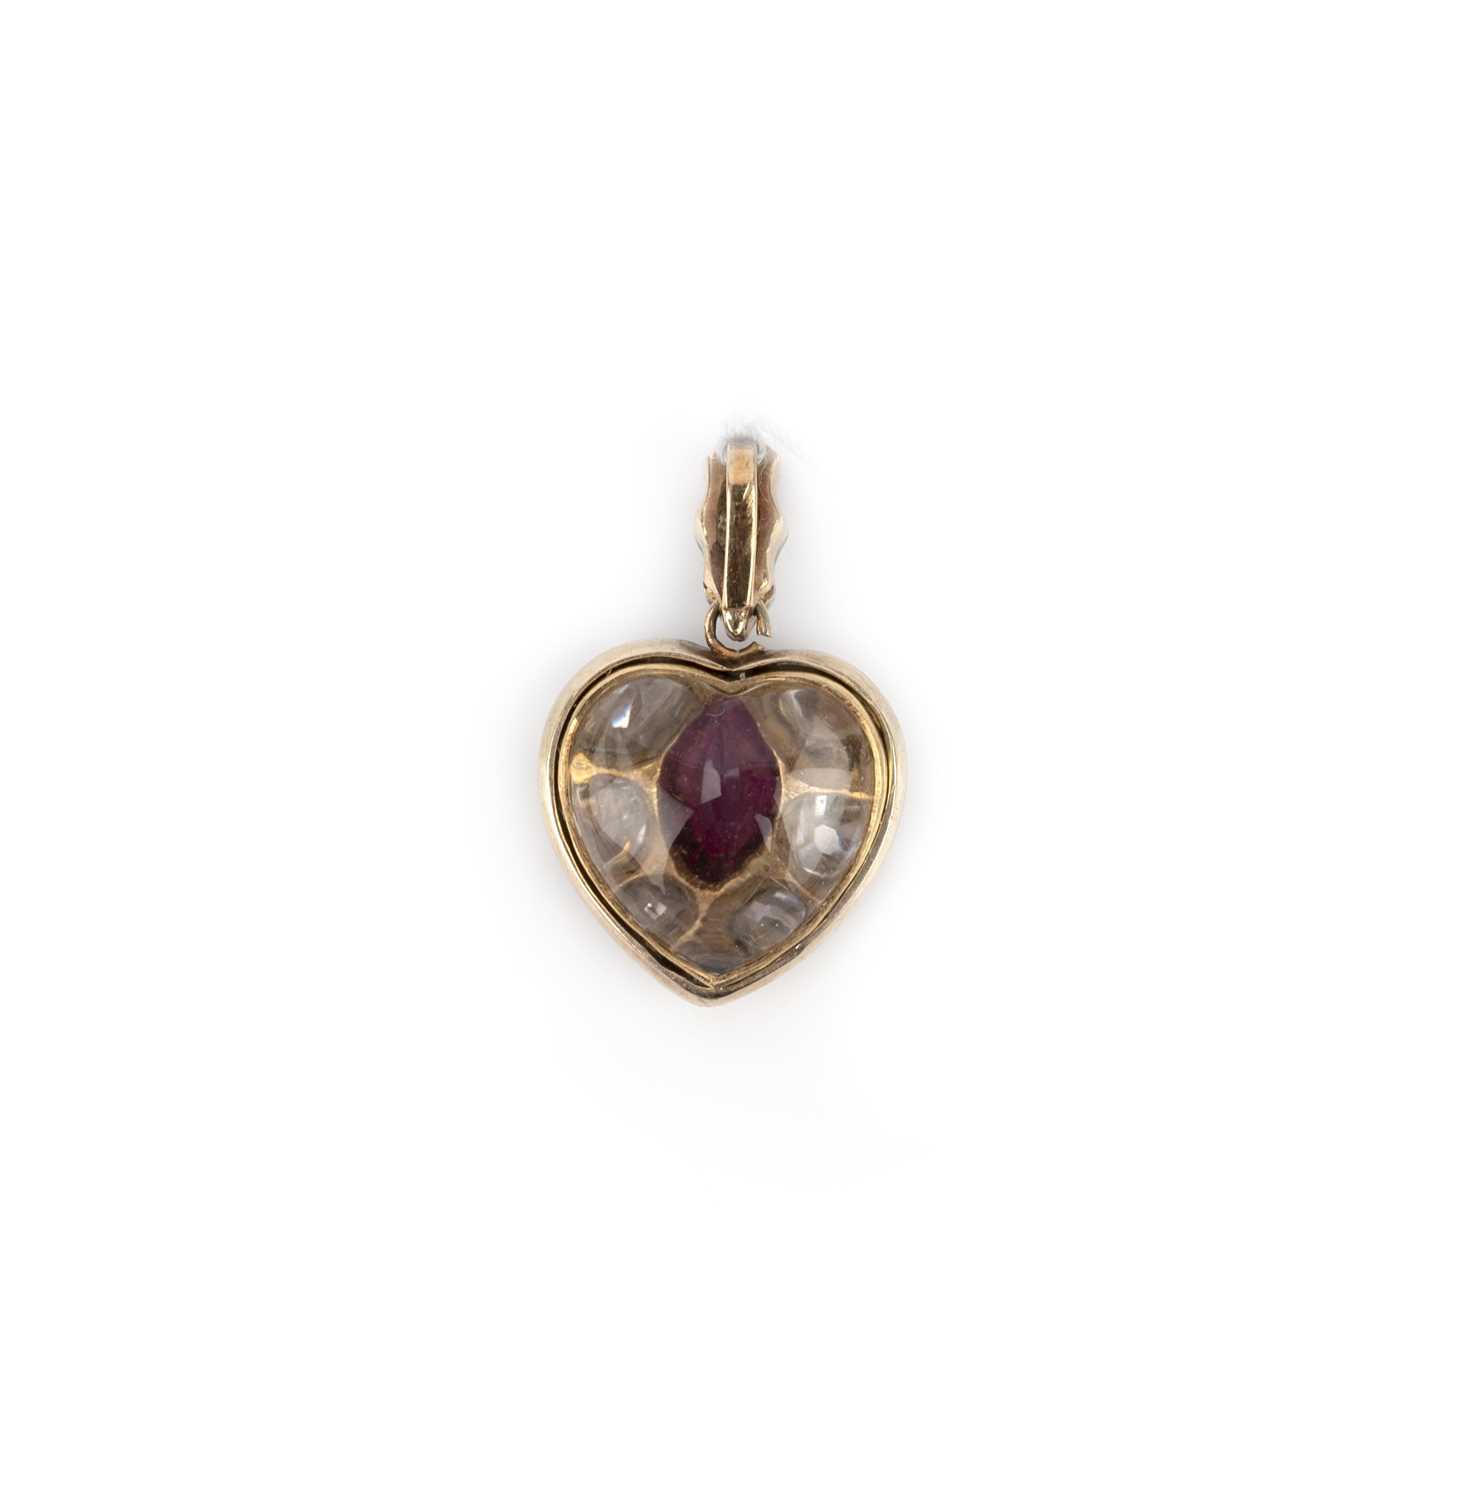 A ruby and diamond locket pendant, designed as a heart, set with cushion-shaped diamonds and a - Image 2 of 2